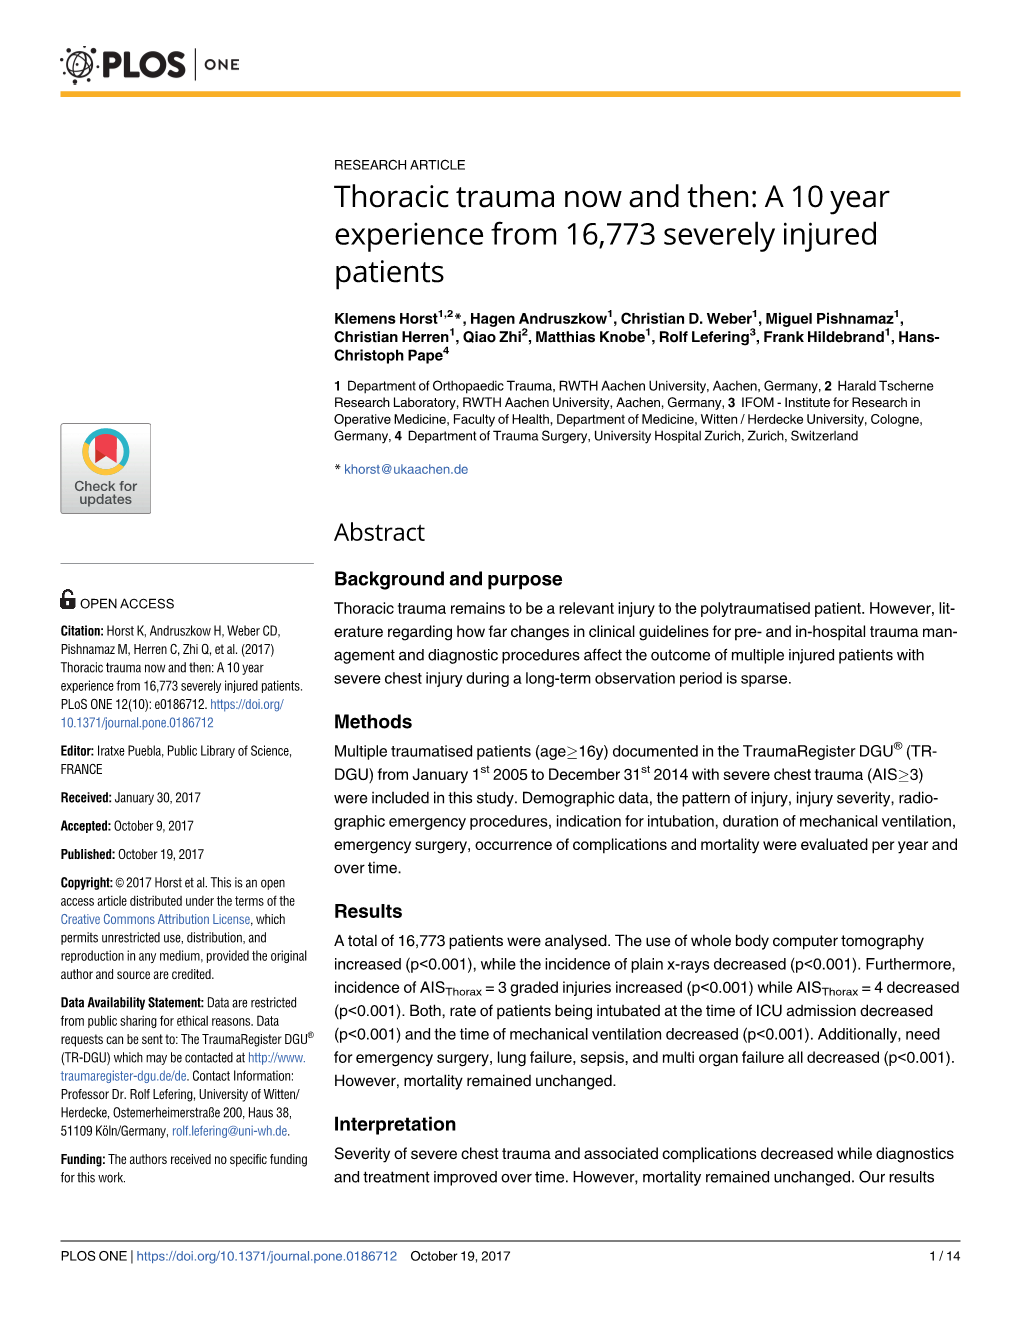 Thoracic Trauma Now and Then: a 10 Year Experience from 16,773 Severely Injured Patients